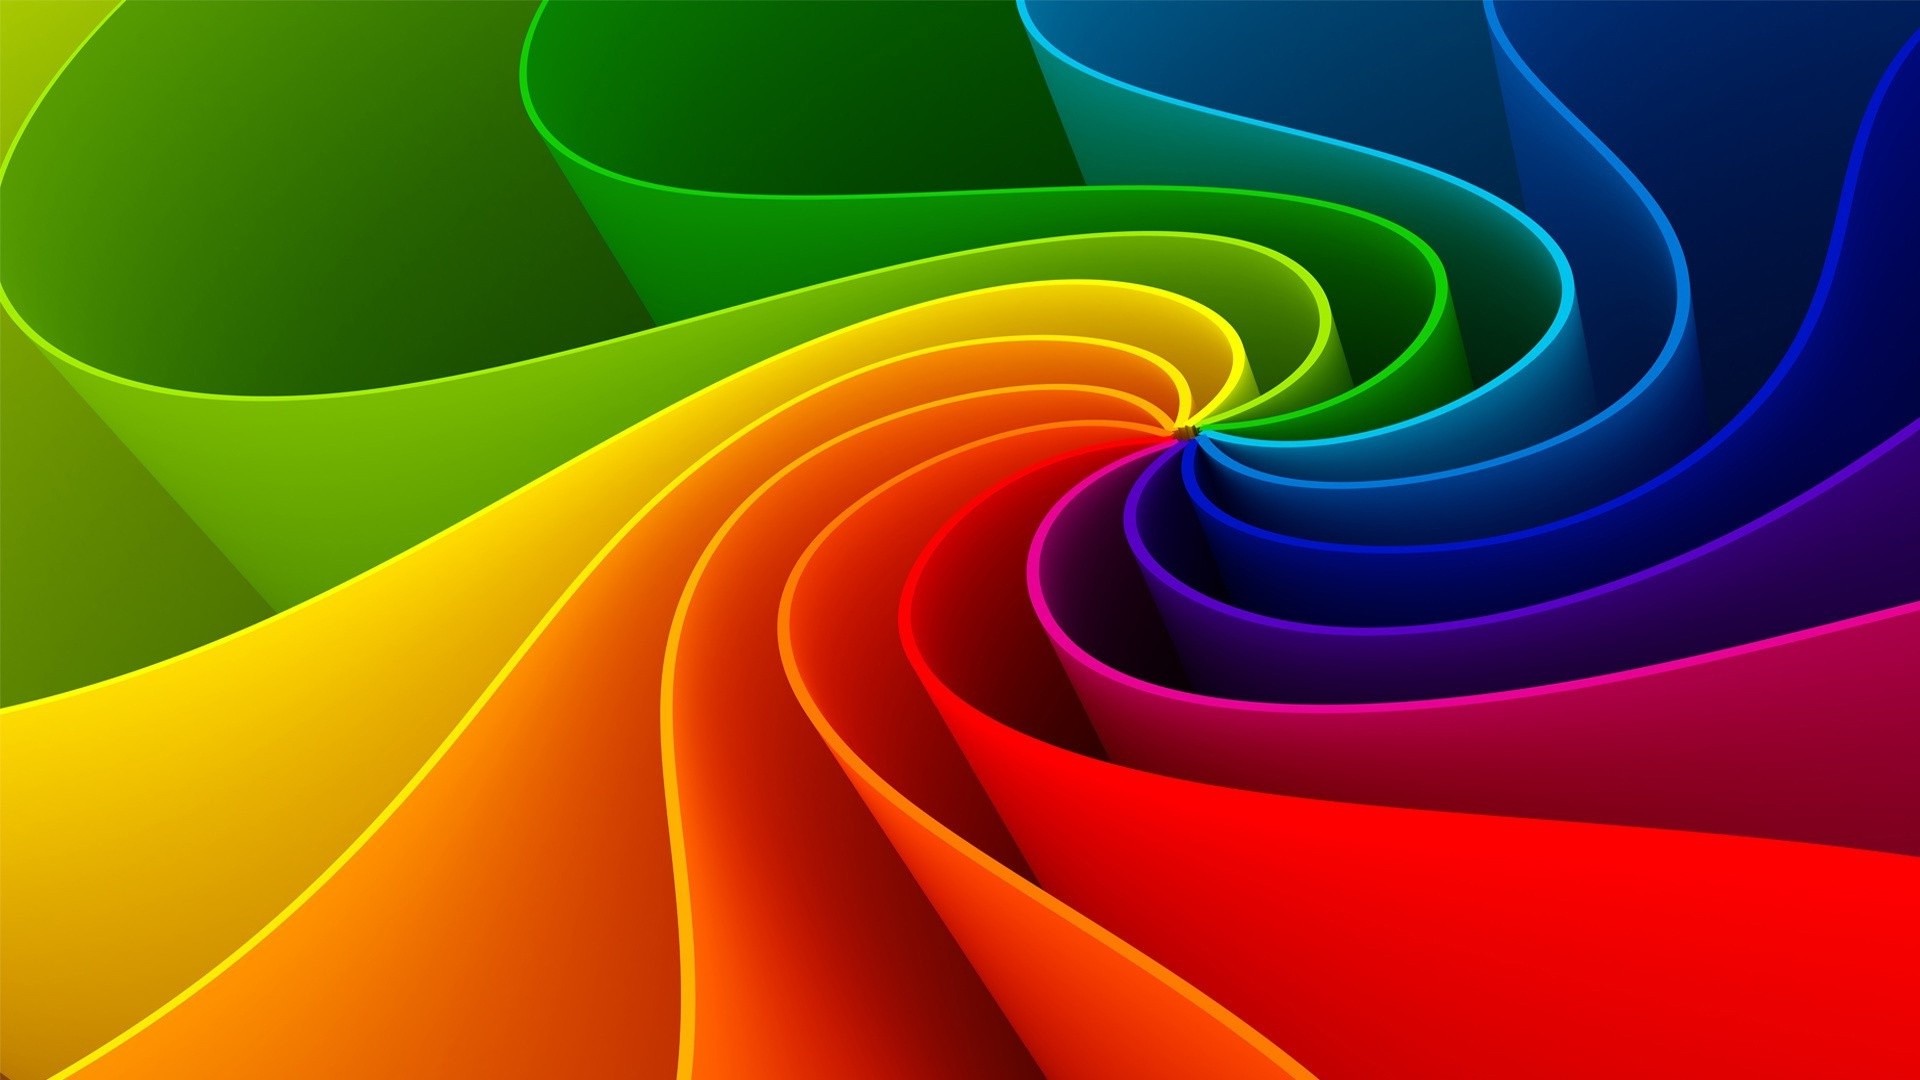 Please check our latest Rainbow HD Wallpapers widescreen below and bring beauty to your desktop.